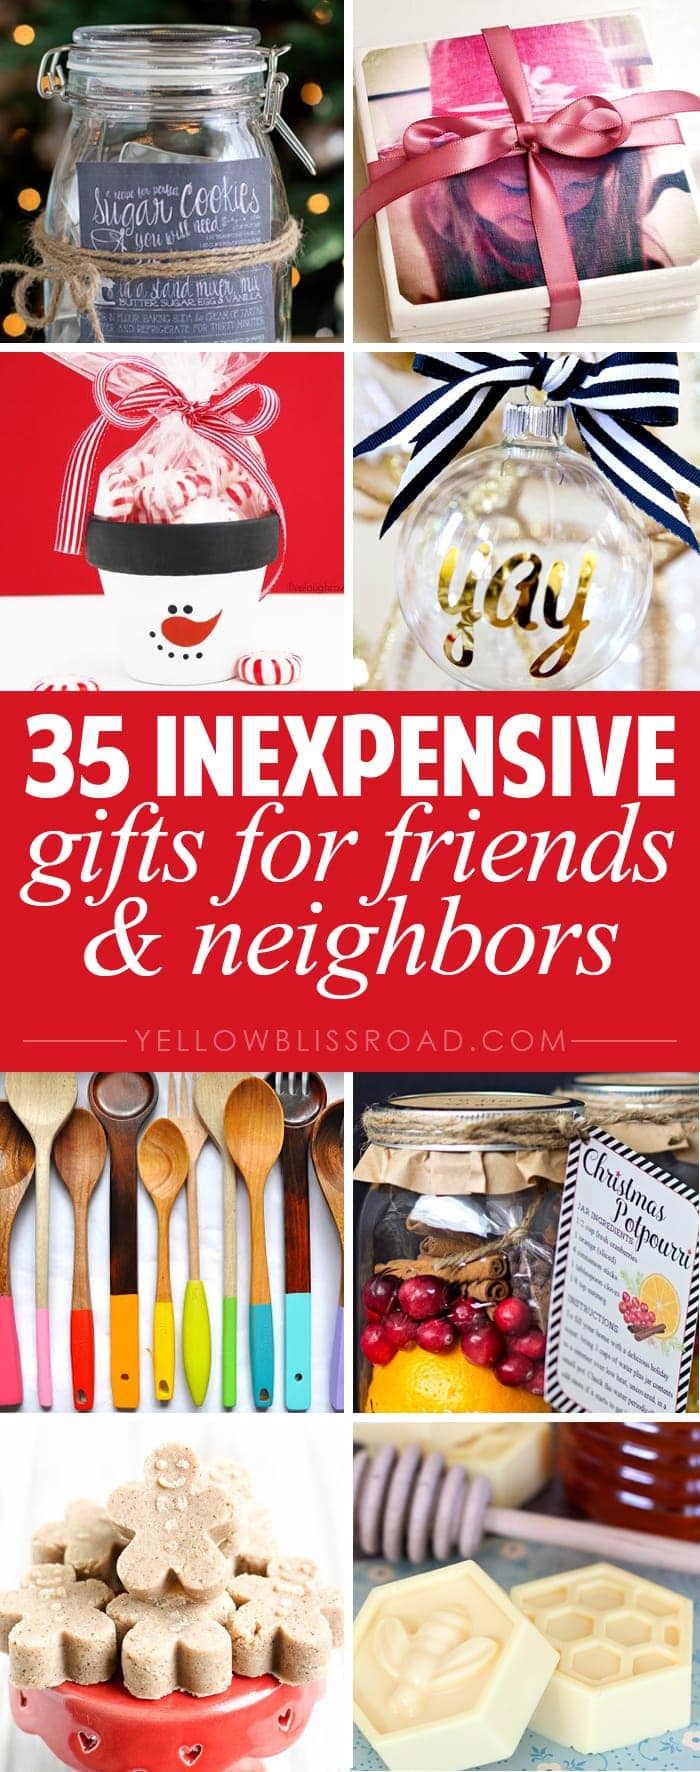 7 Inexpensive Christmas Gifts for Neighbors and Co-workers